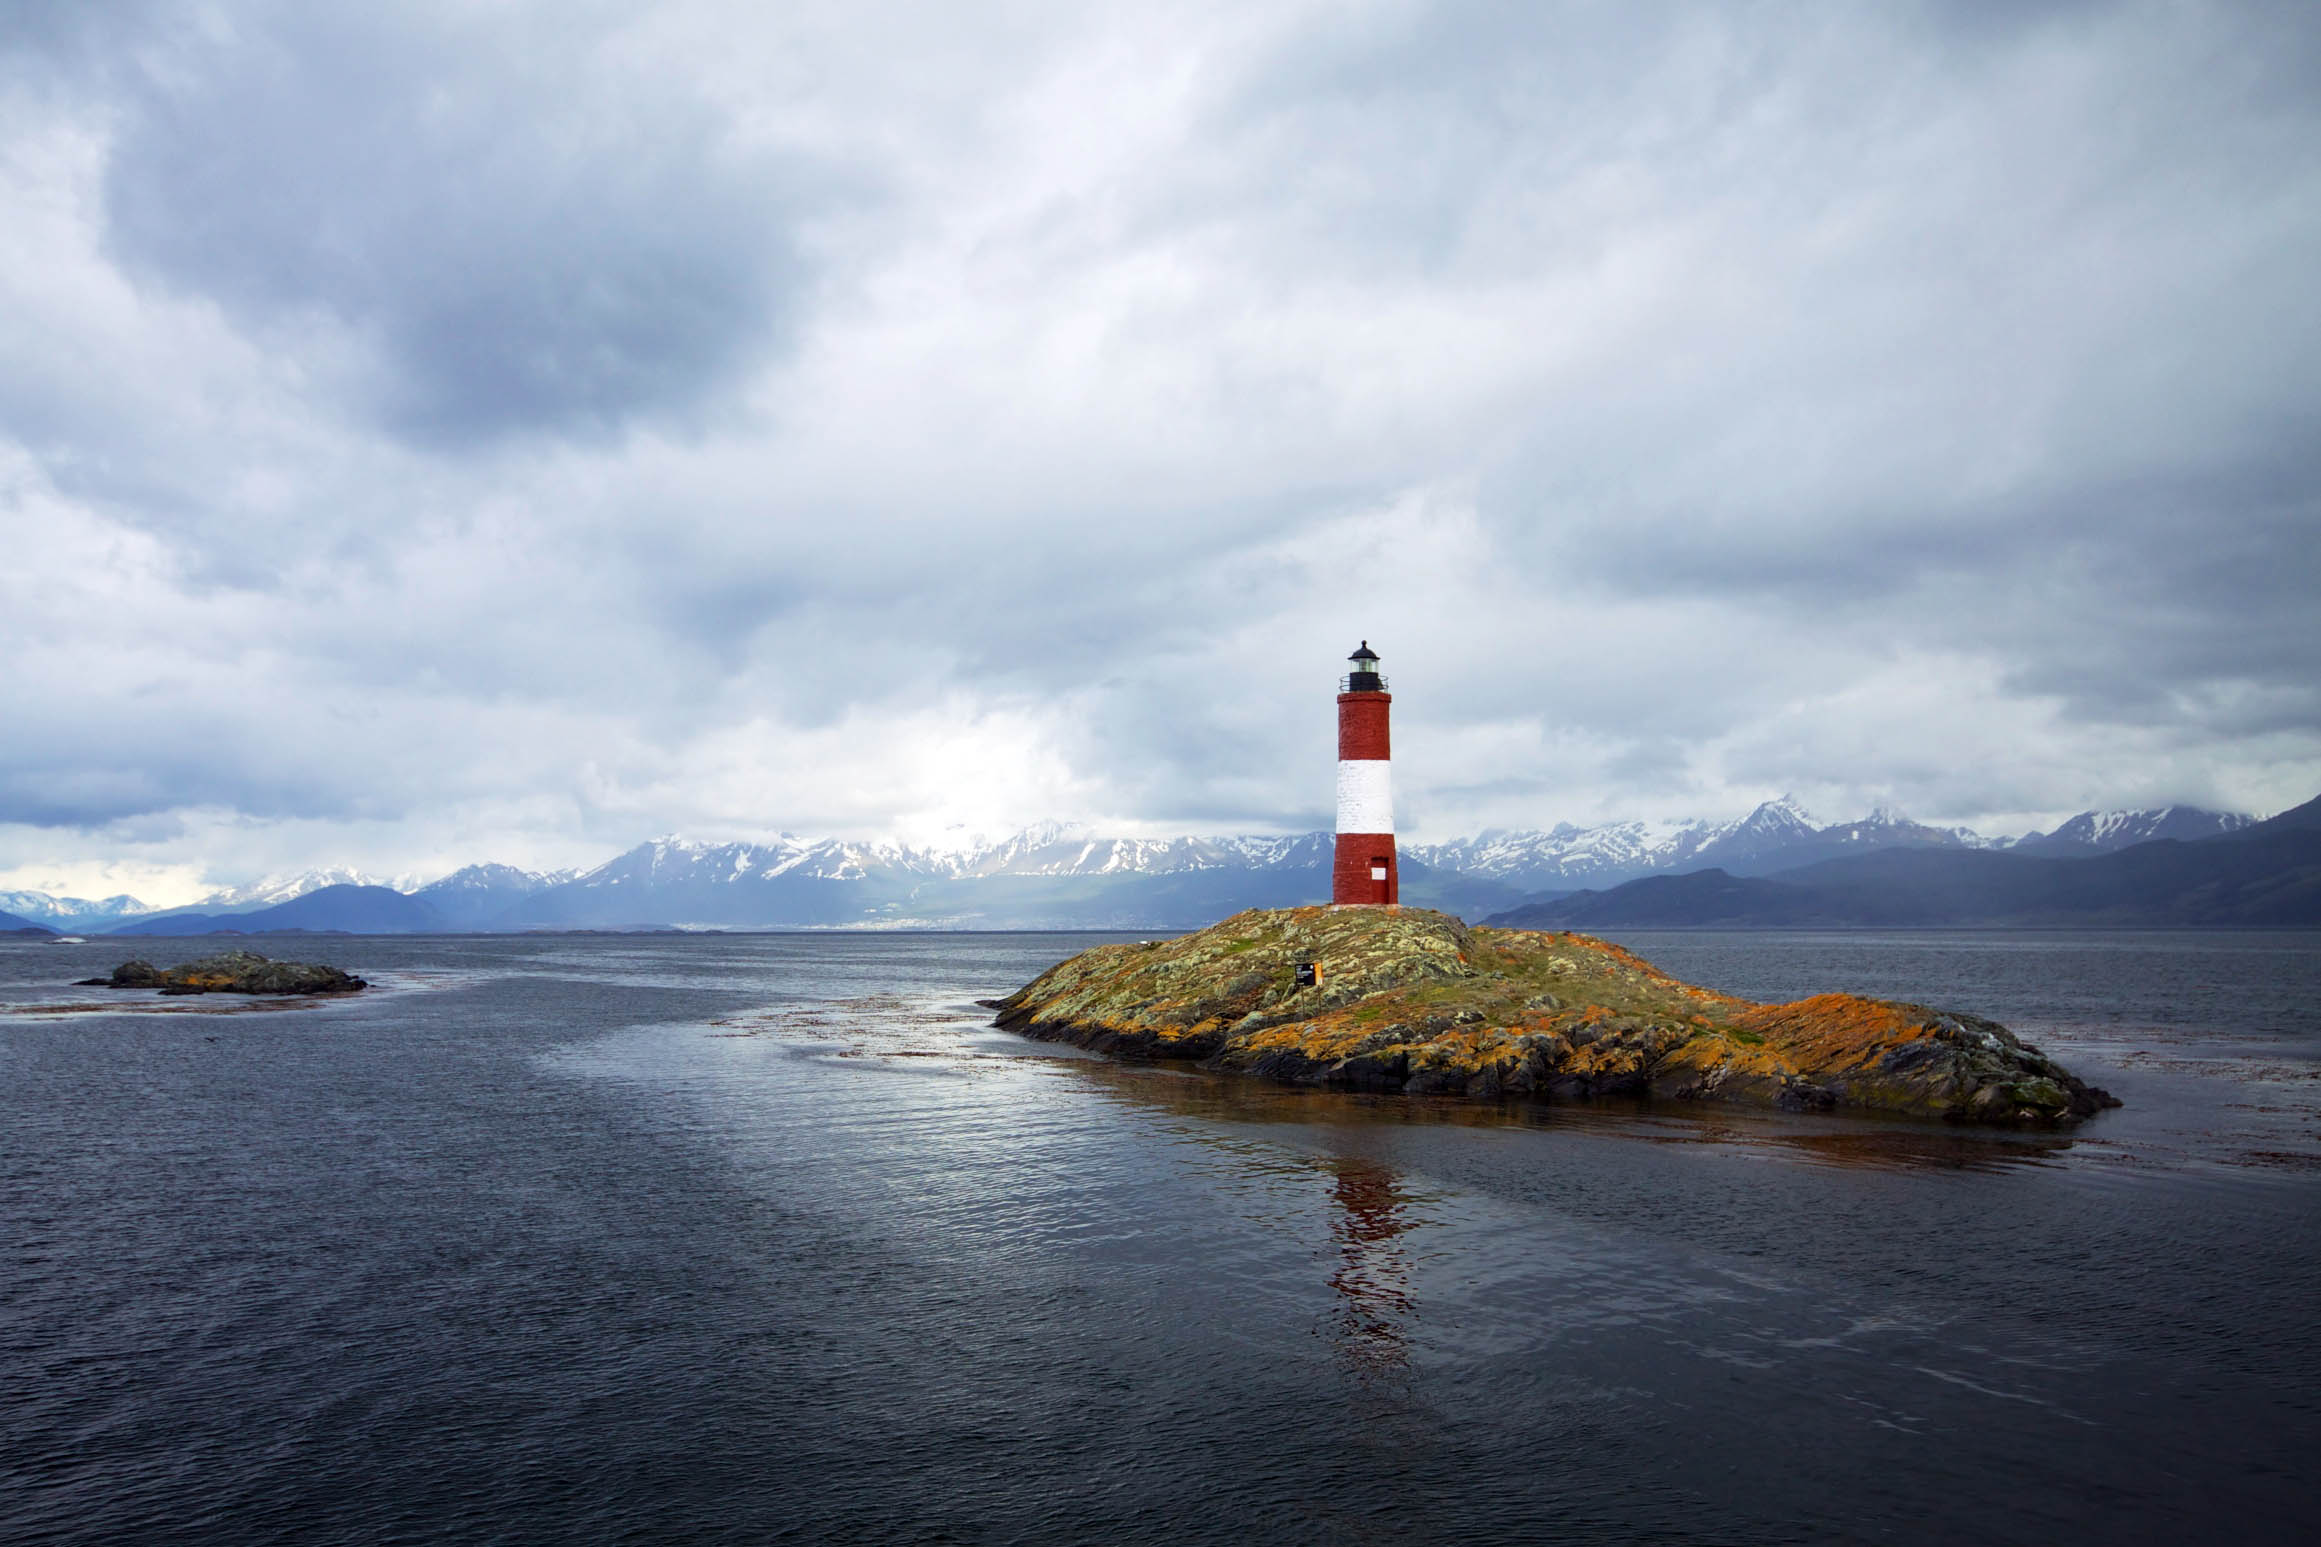 Head for the end of the earth at Tierra del Fuego. Image by McKay Savage / CC BY 2.0